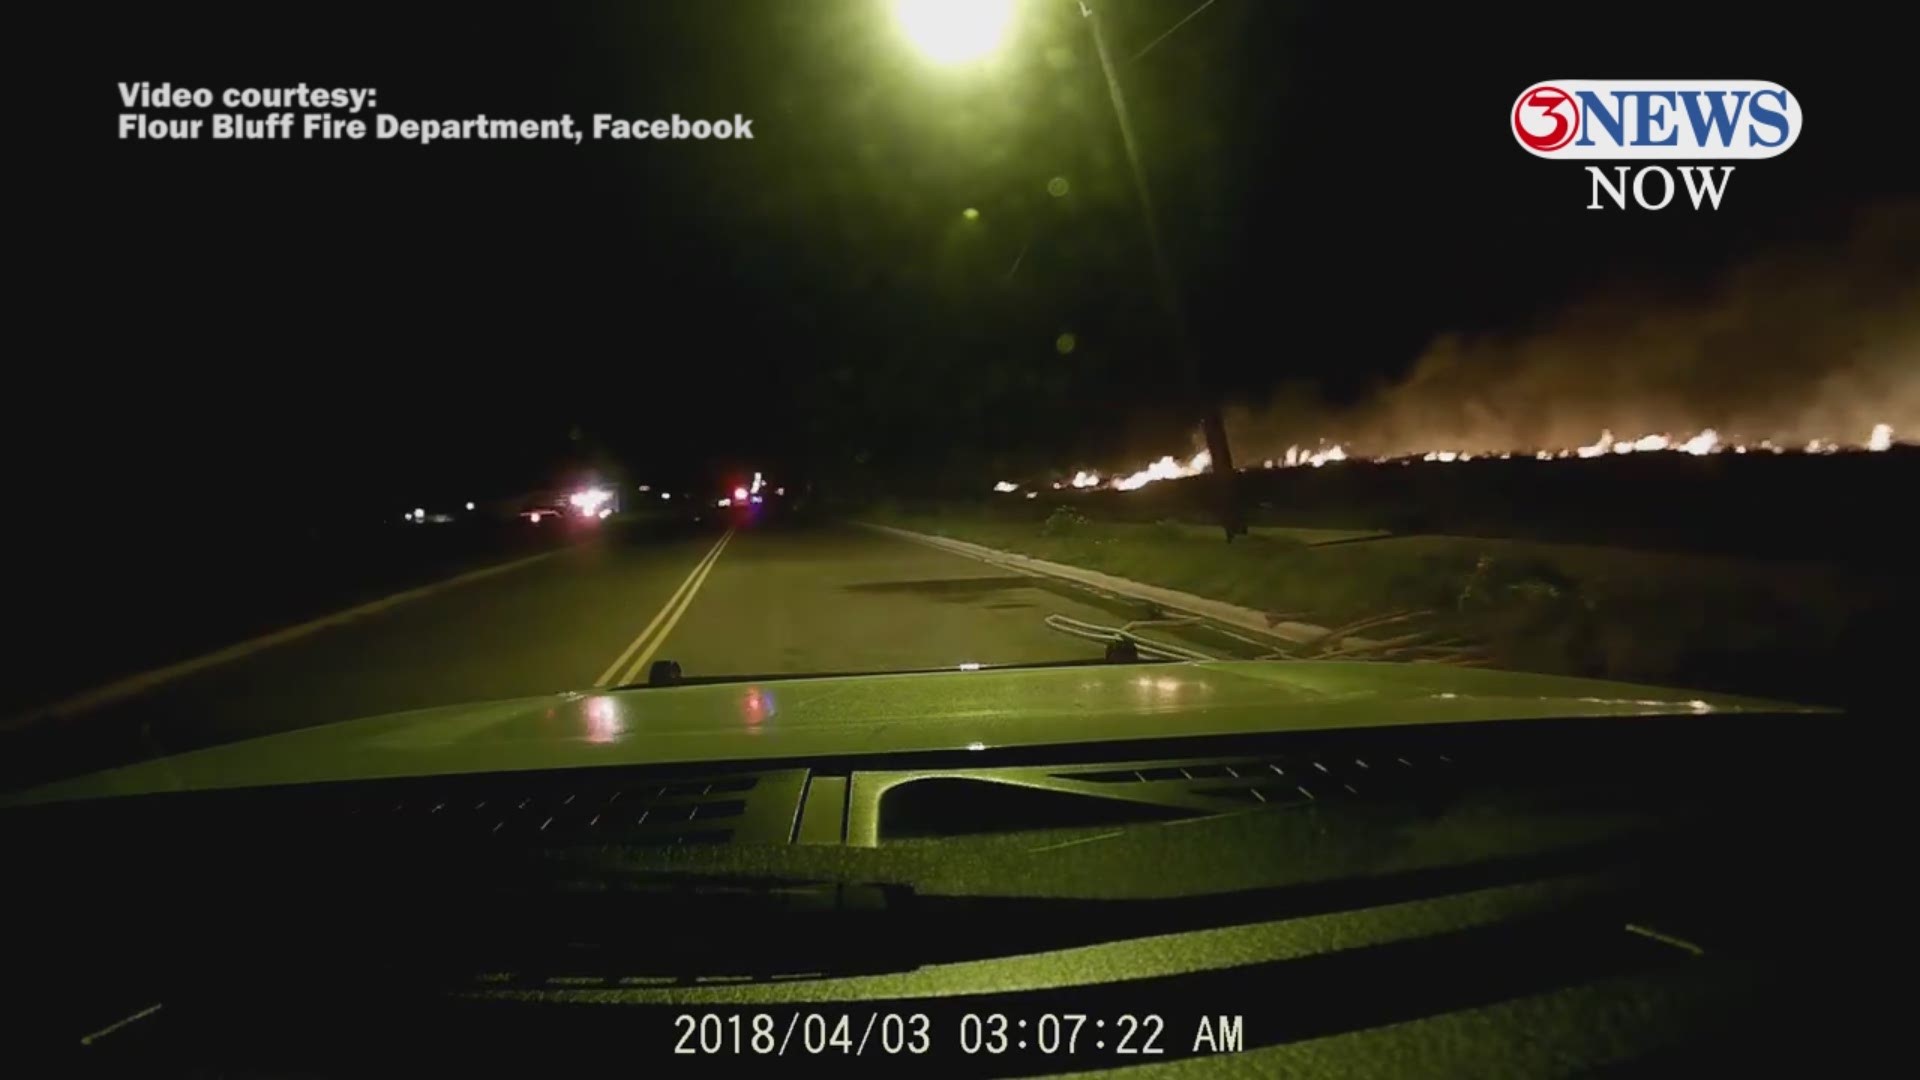 A major grass fire broke out on Padre Island Tuesday morning. Authorities captured dash cam footage of the blaze.